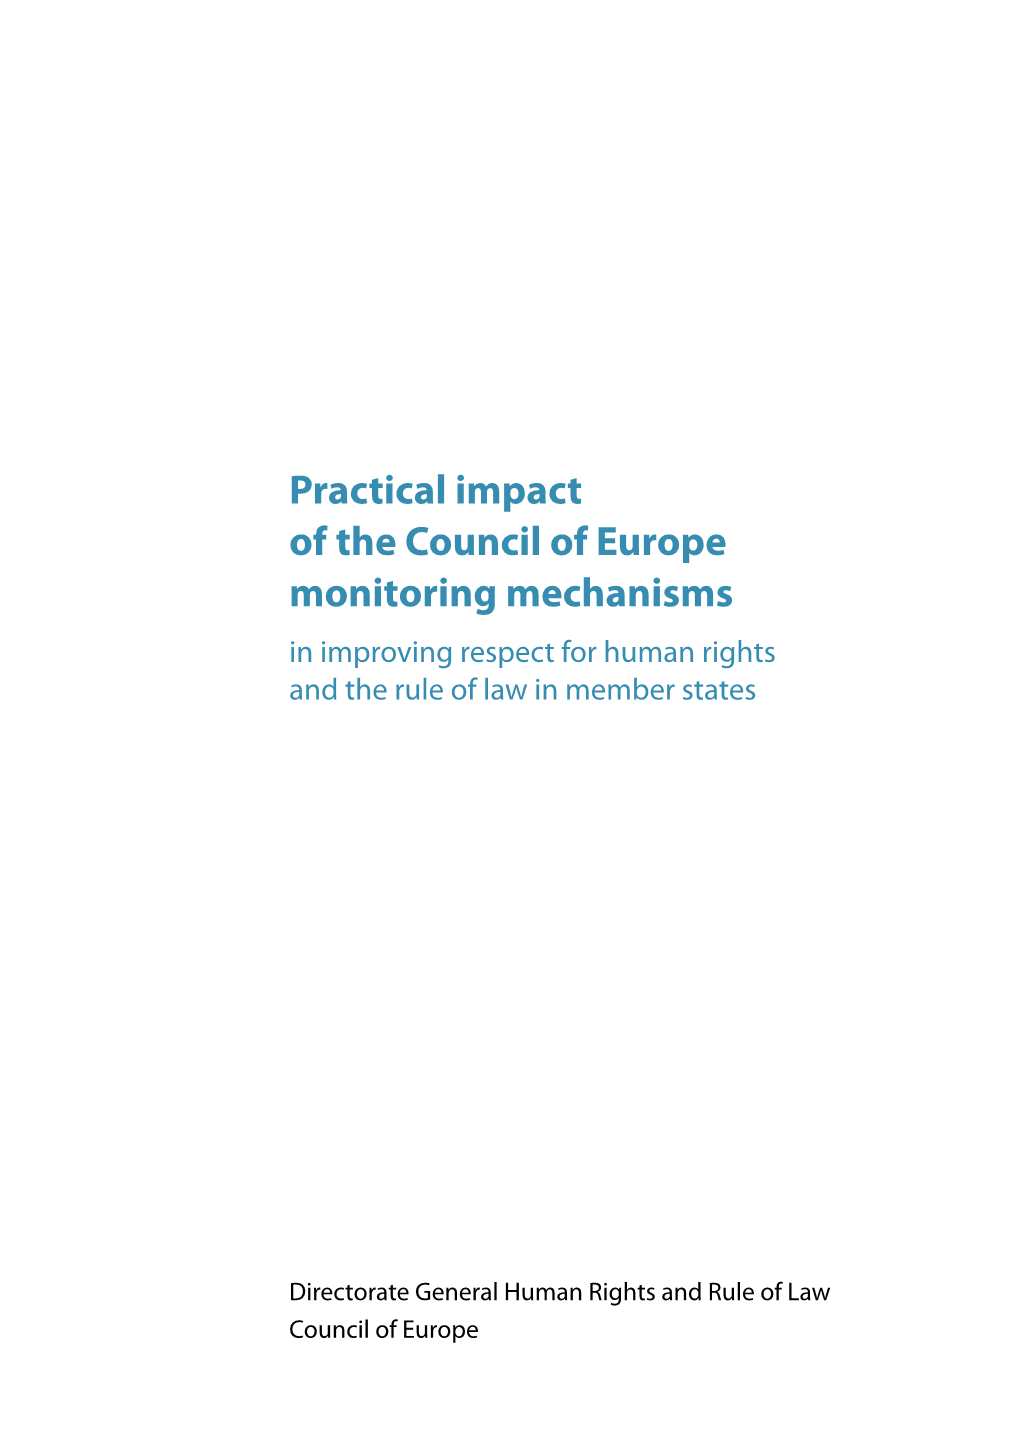 Practical Impact of the Council of Europe Monitoring Mechanisms in Improving Respect for Human Rights and the Rule of Law in Member States